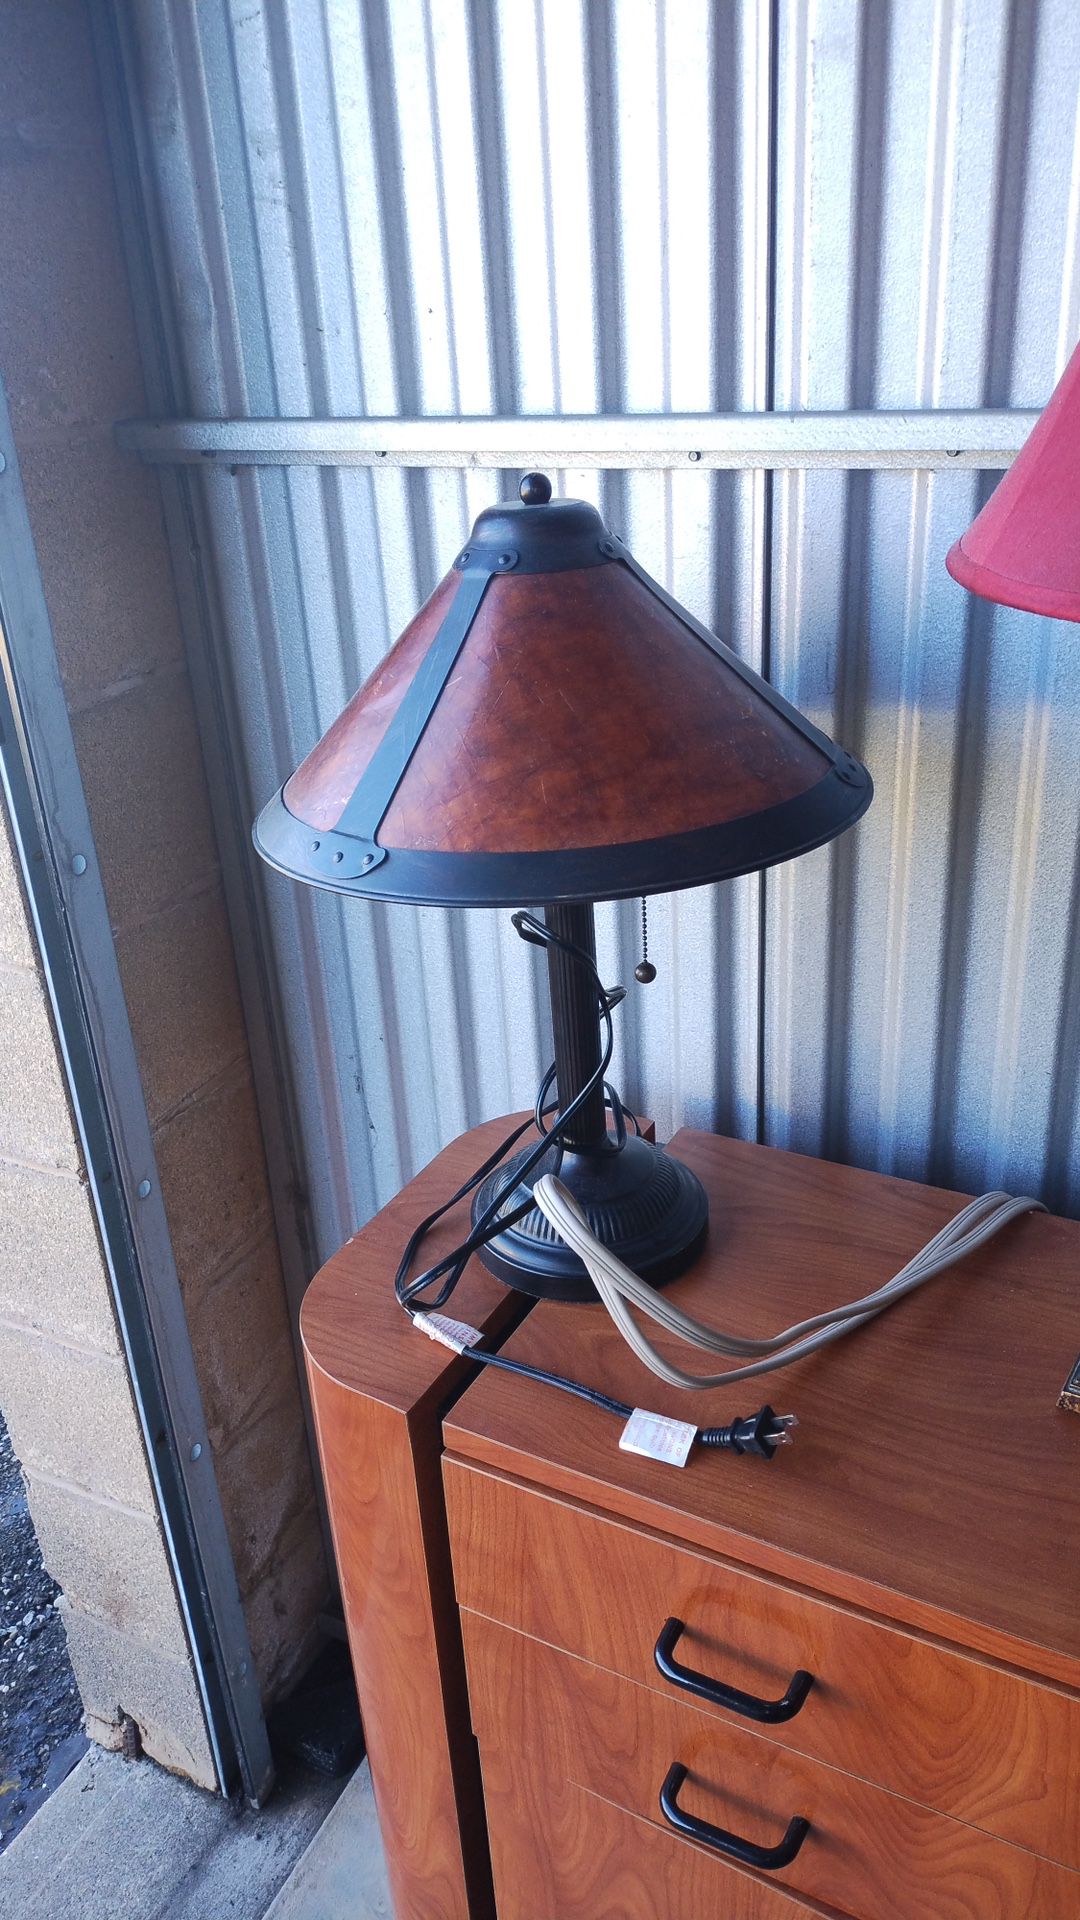 Lights And Furniture Best Offer Text Mike At (contact info removed)